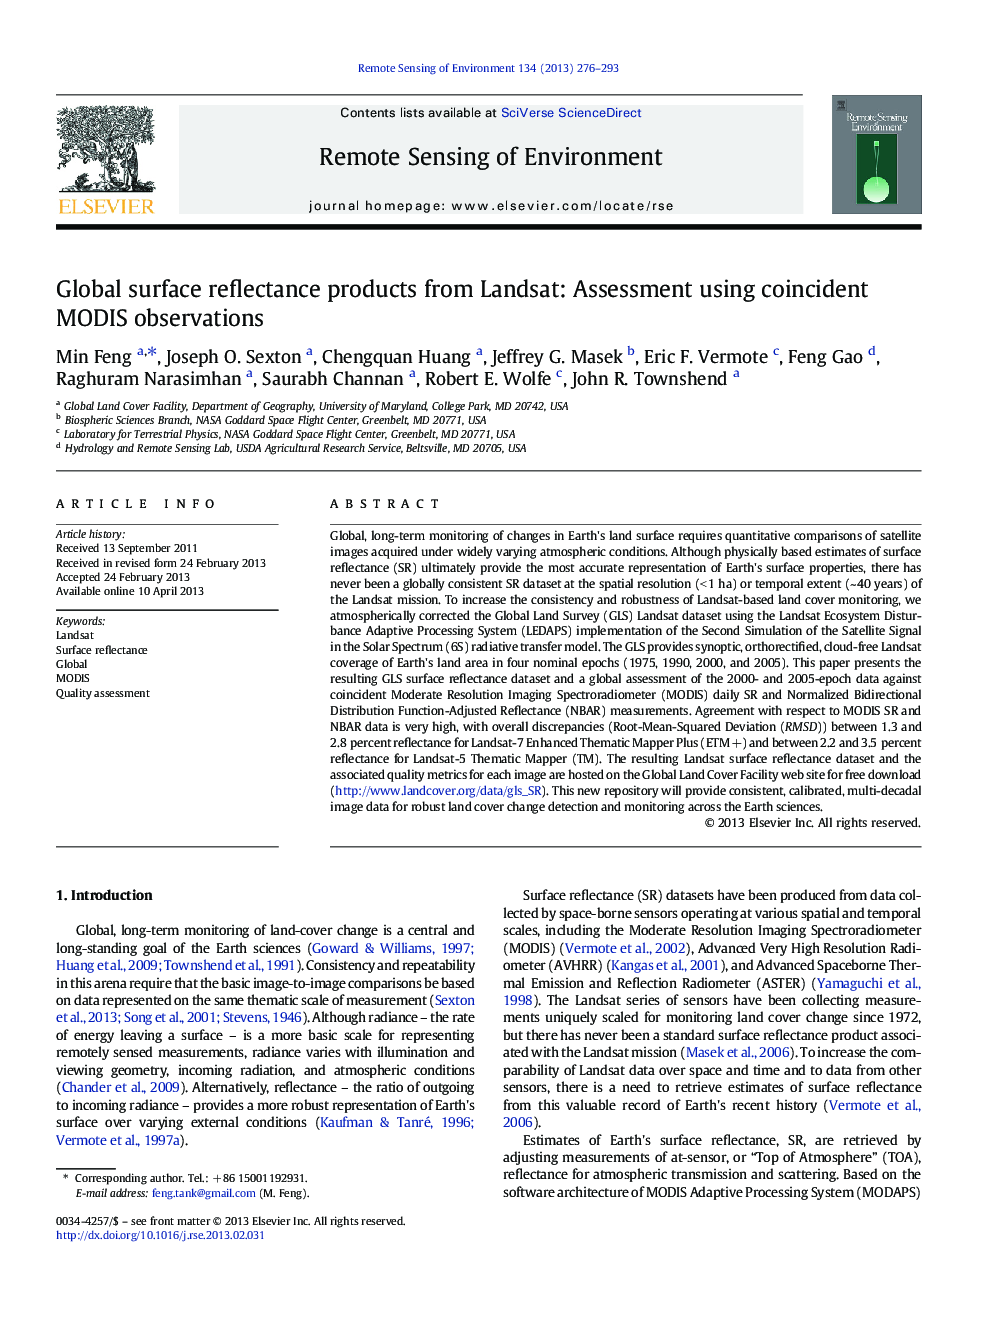 Global surface reflectance products from Landsat: Assessment using coincident MODIS observations